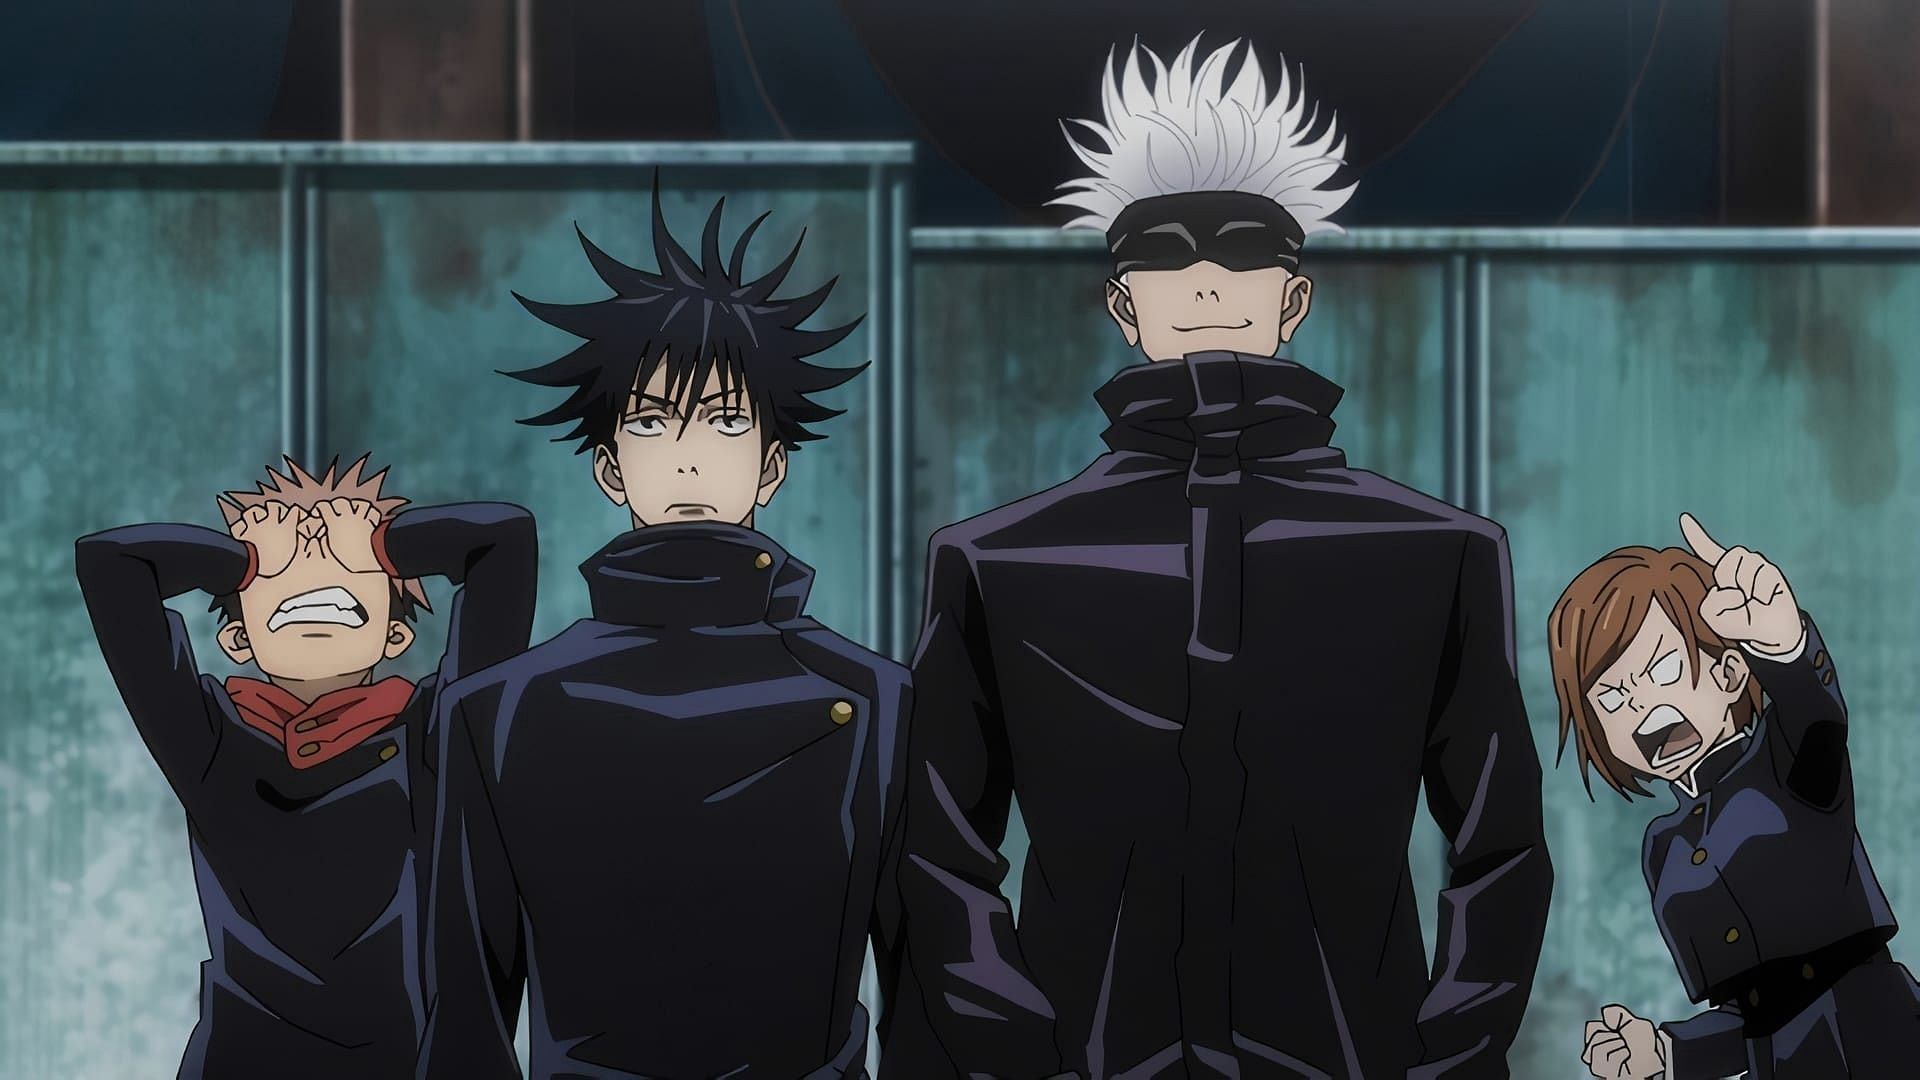 Jujutsu Kaisen Season 2 Episode 16 is ranked 2nd for Top 10 Anime of the  Week between November 3 and 10, 2023 list (by Anime Corner) :  r/JuJutsuKaisen